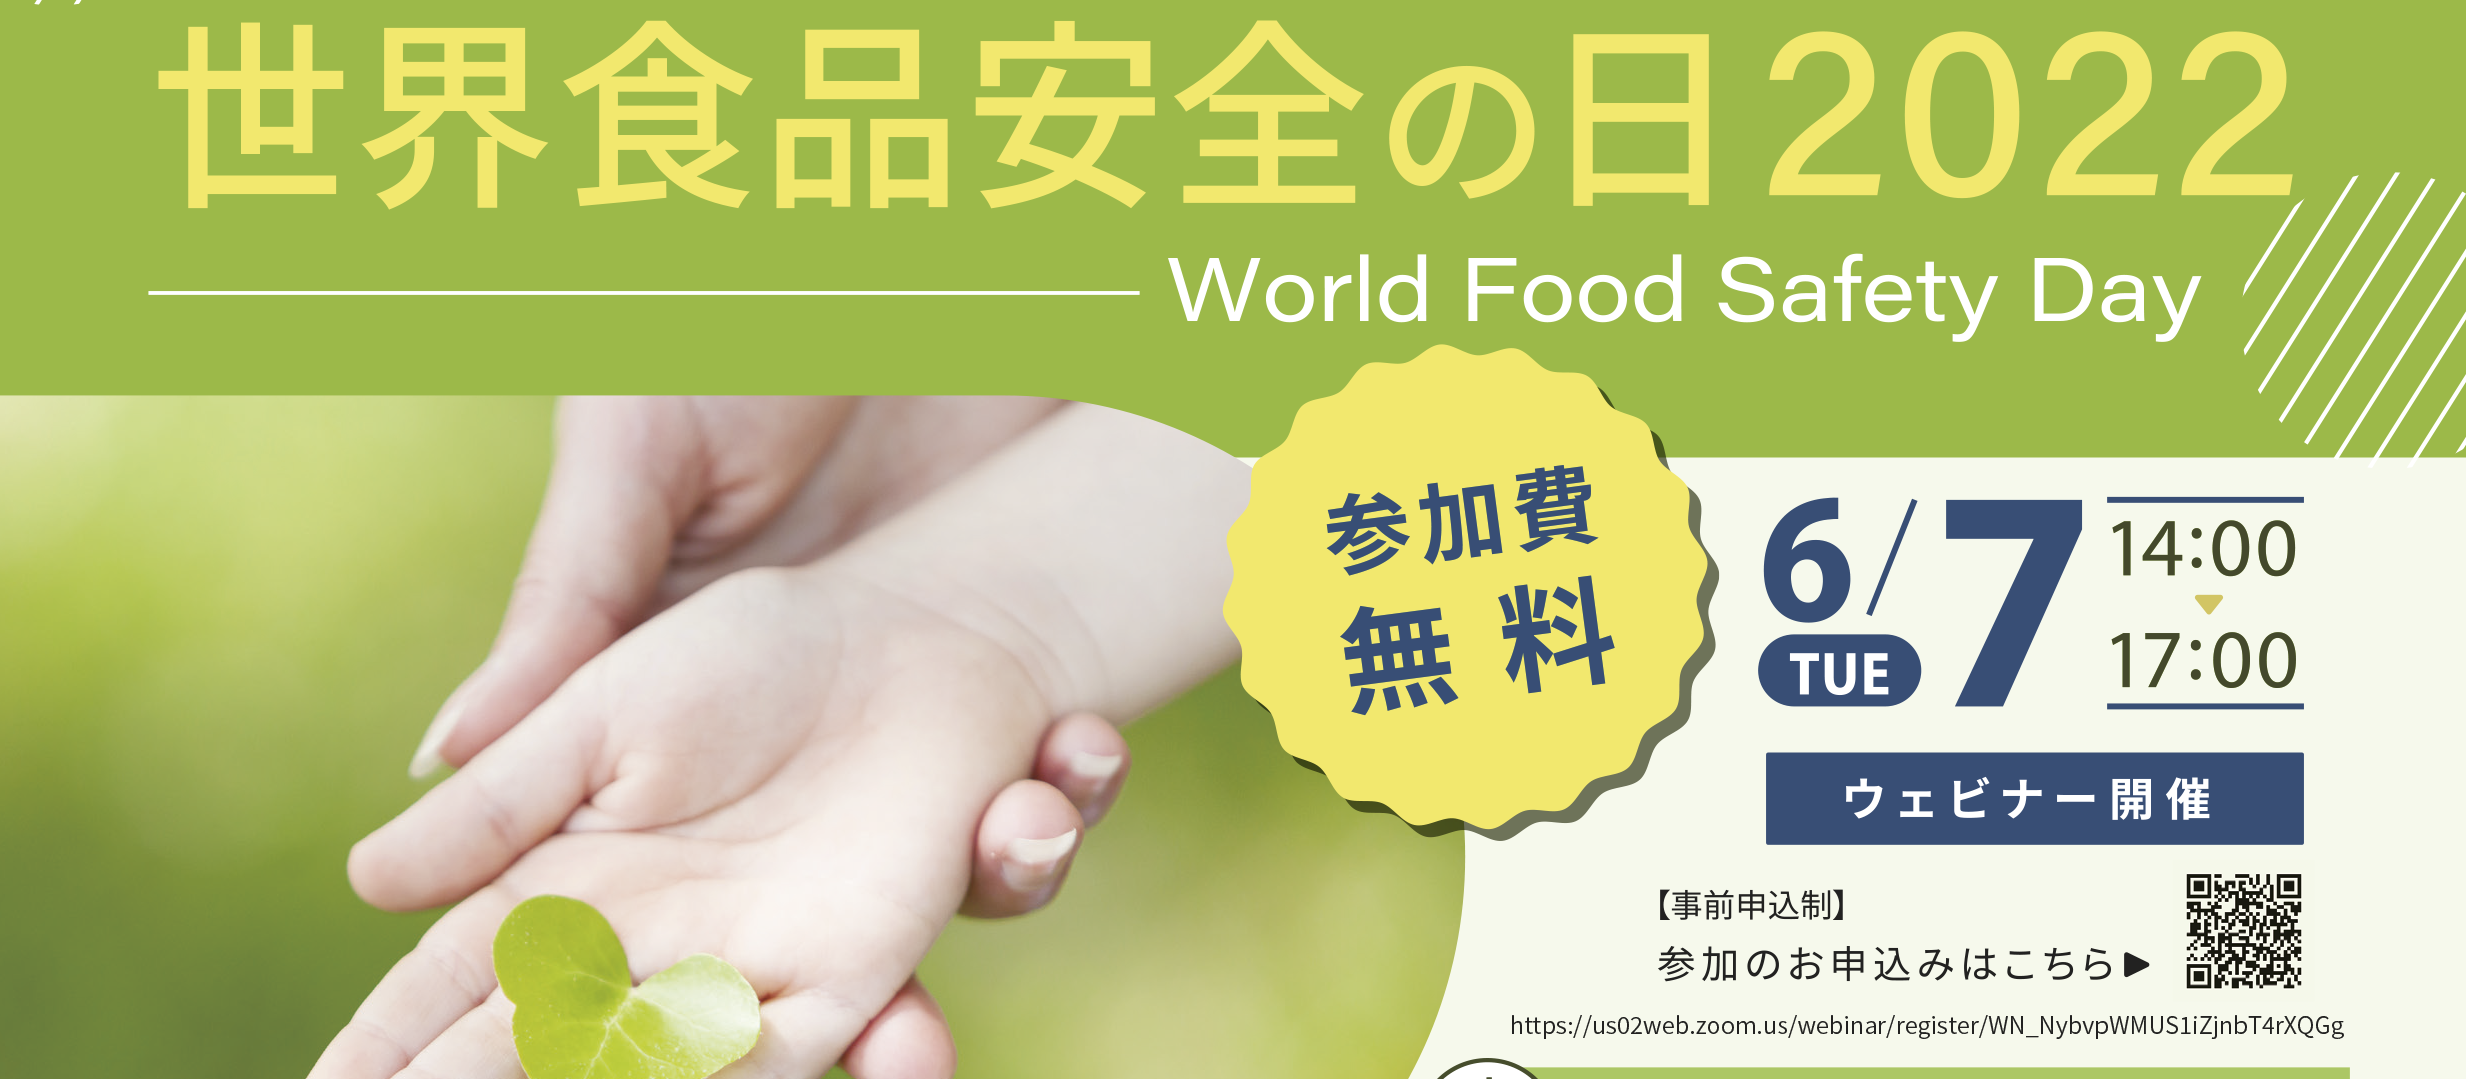 Japan S Food Safety Management Association To Host A World Food Safety Day Webinar Codexalimentarius